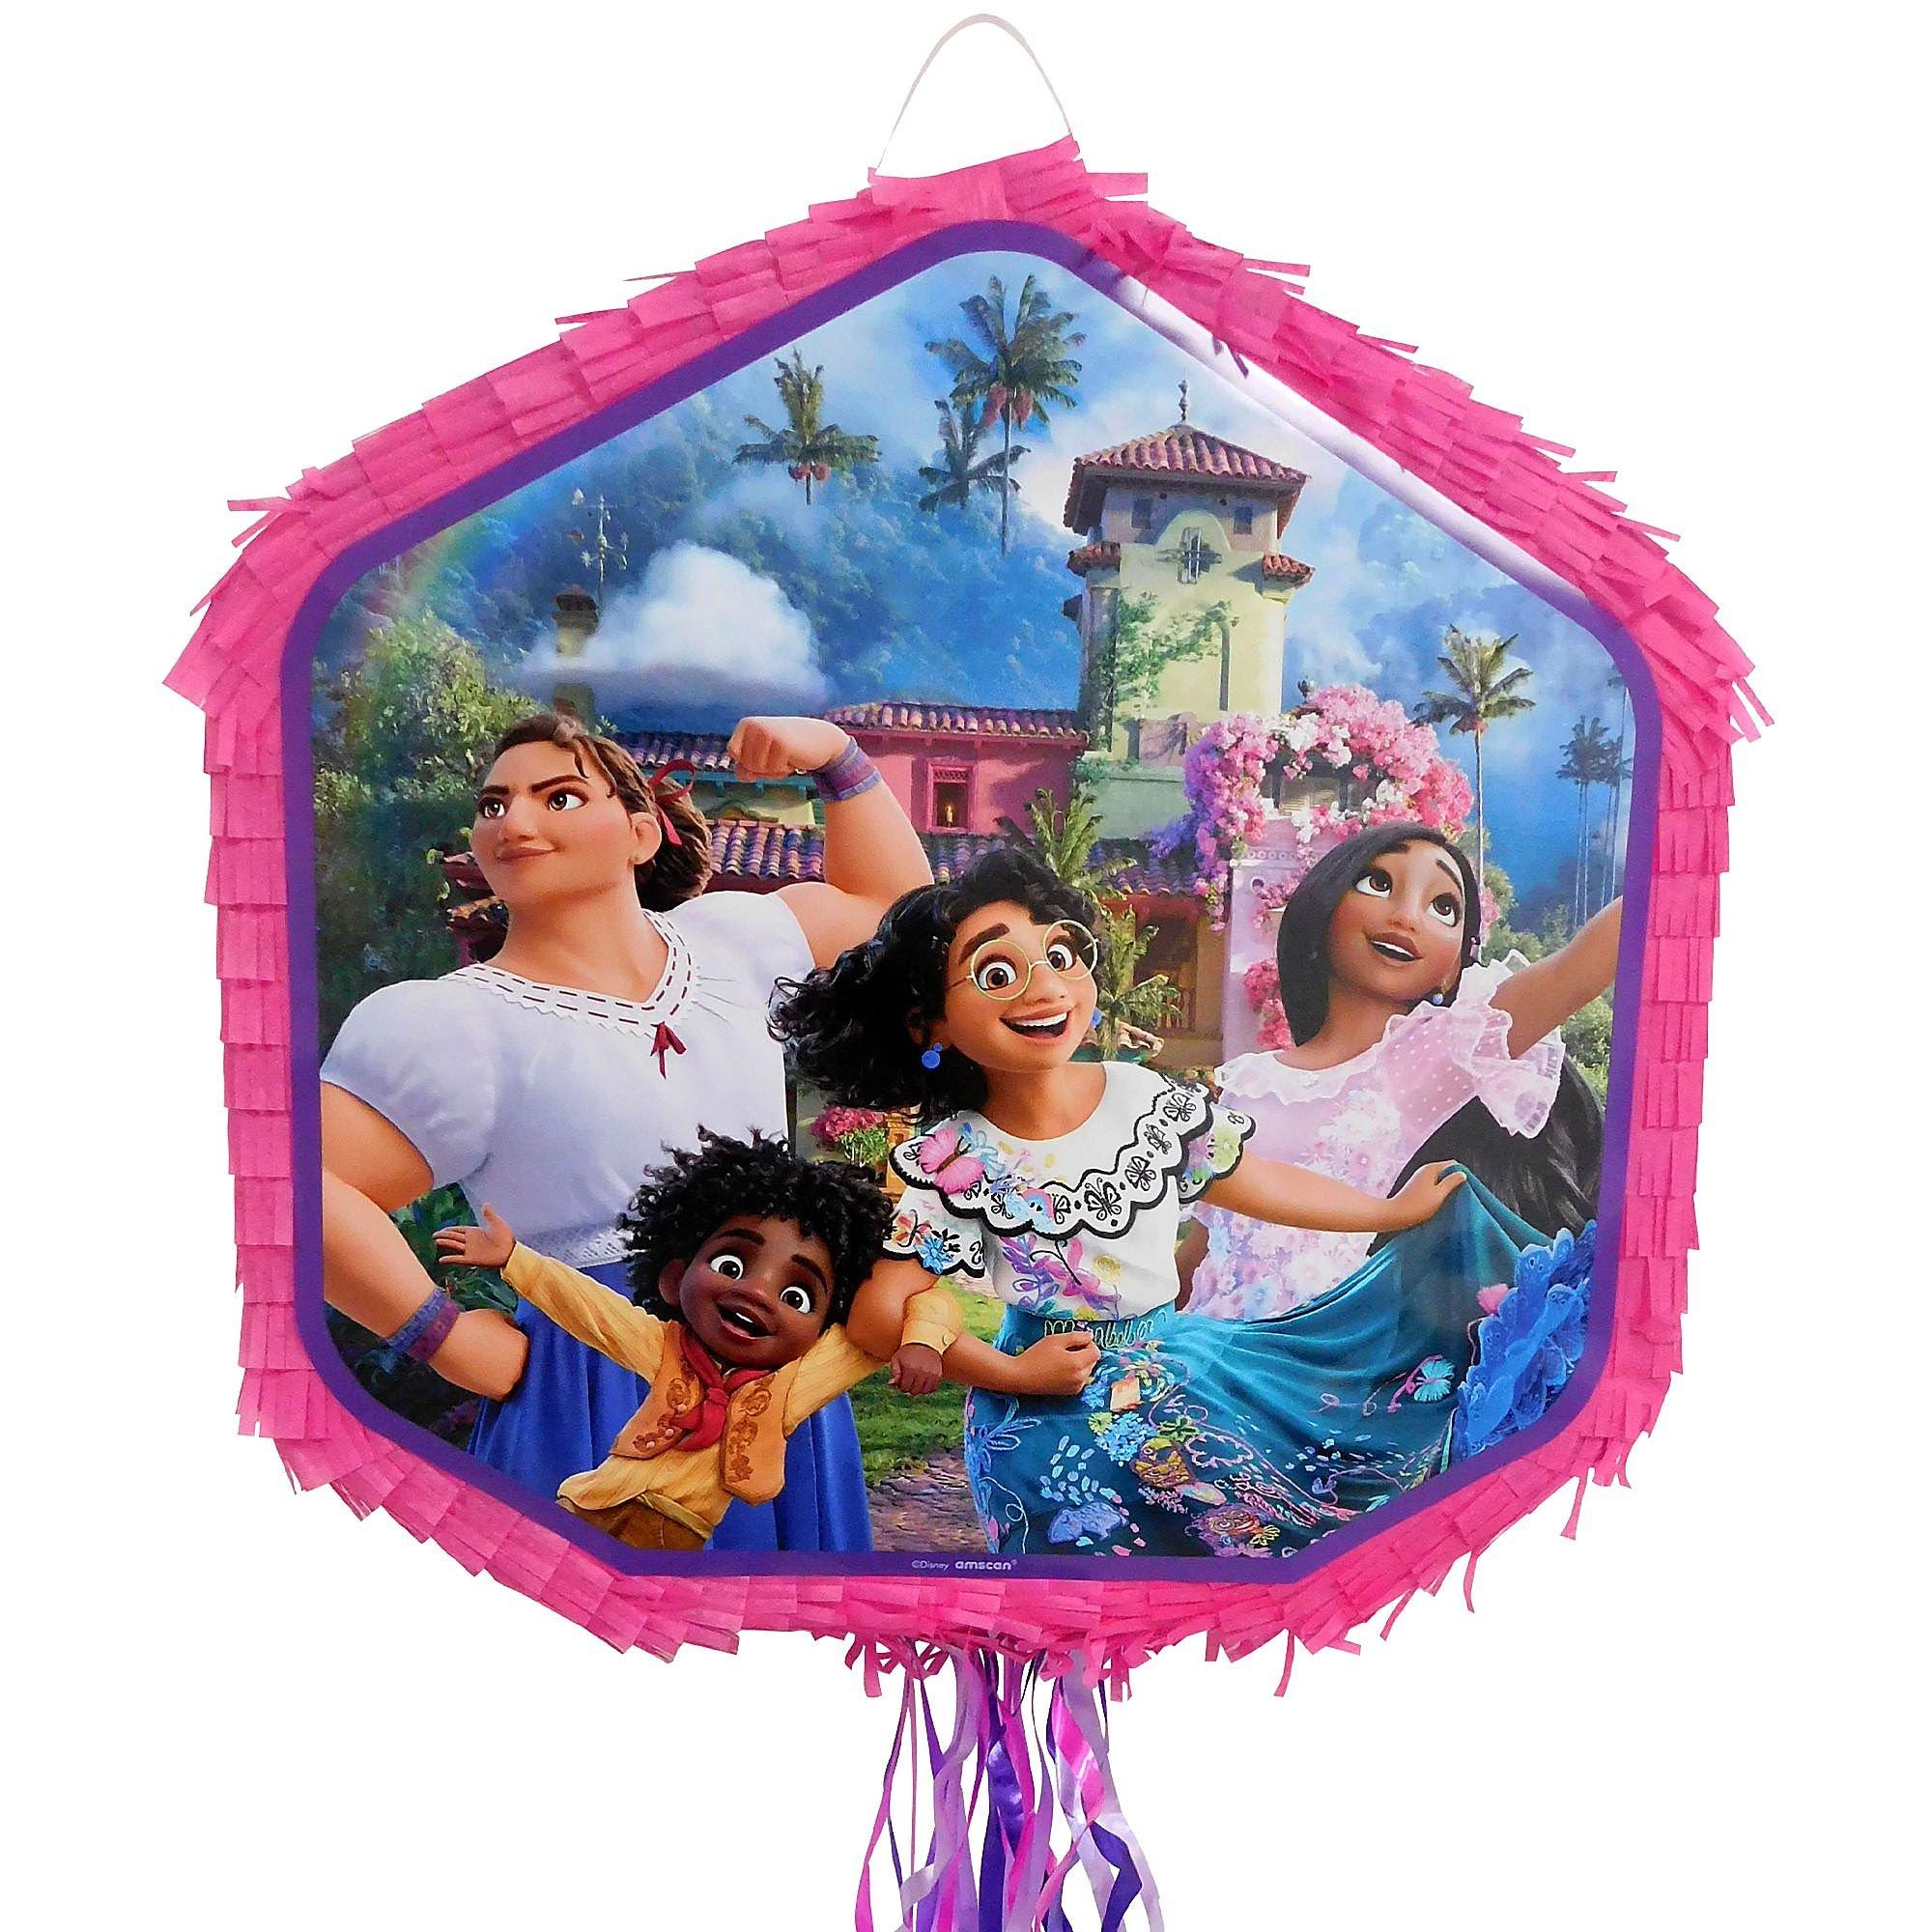 piñata filling (for adults)  Mens birthday party, Adult birthday party,  Pinata fillers